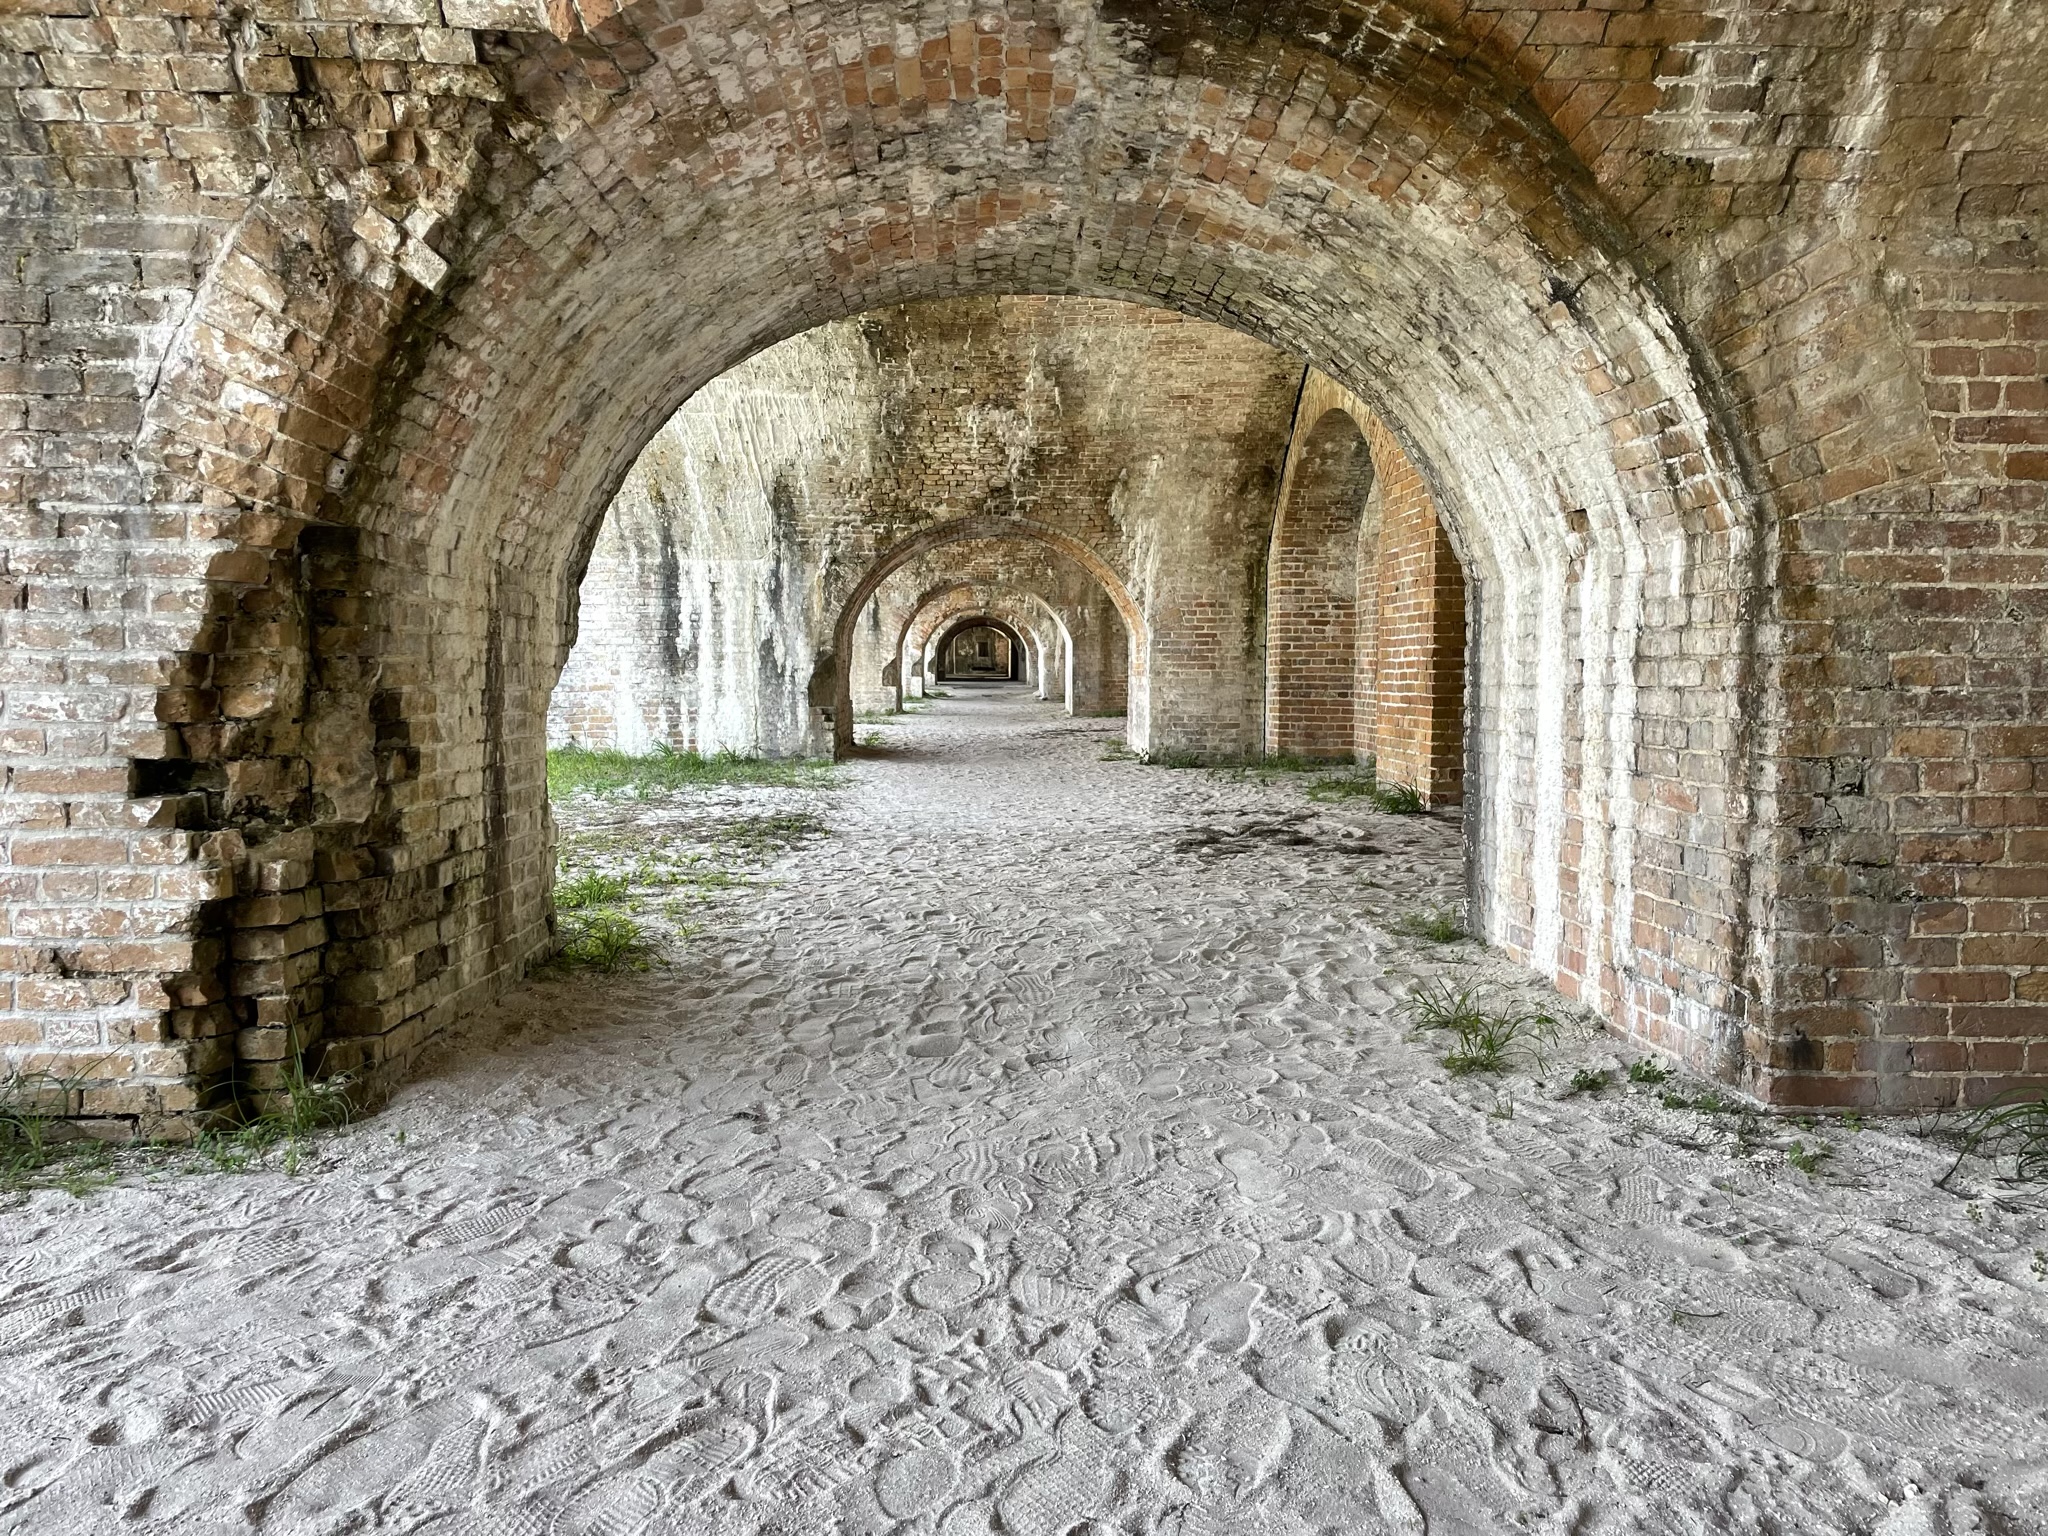 A photo of five archways in a row, stretching into the distance, inside the fort